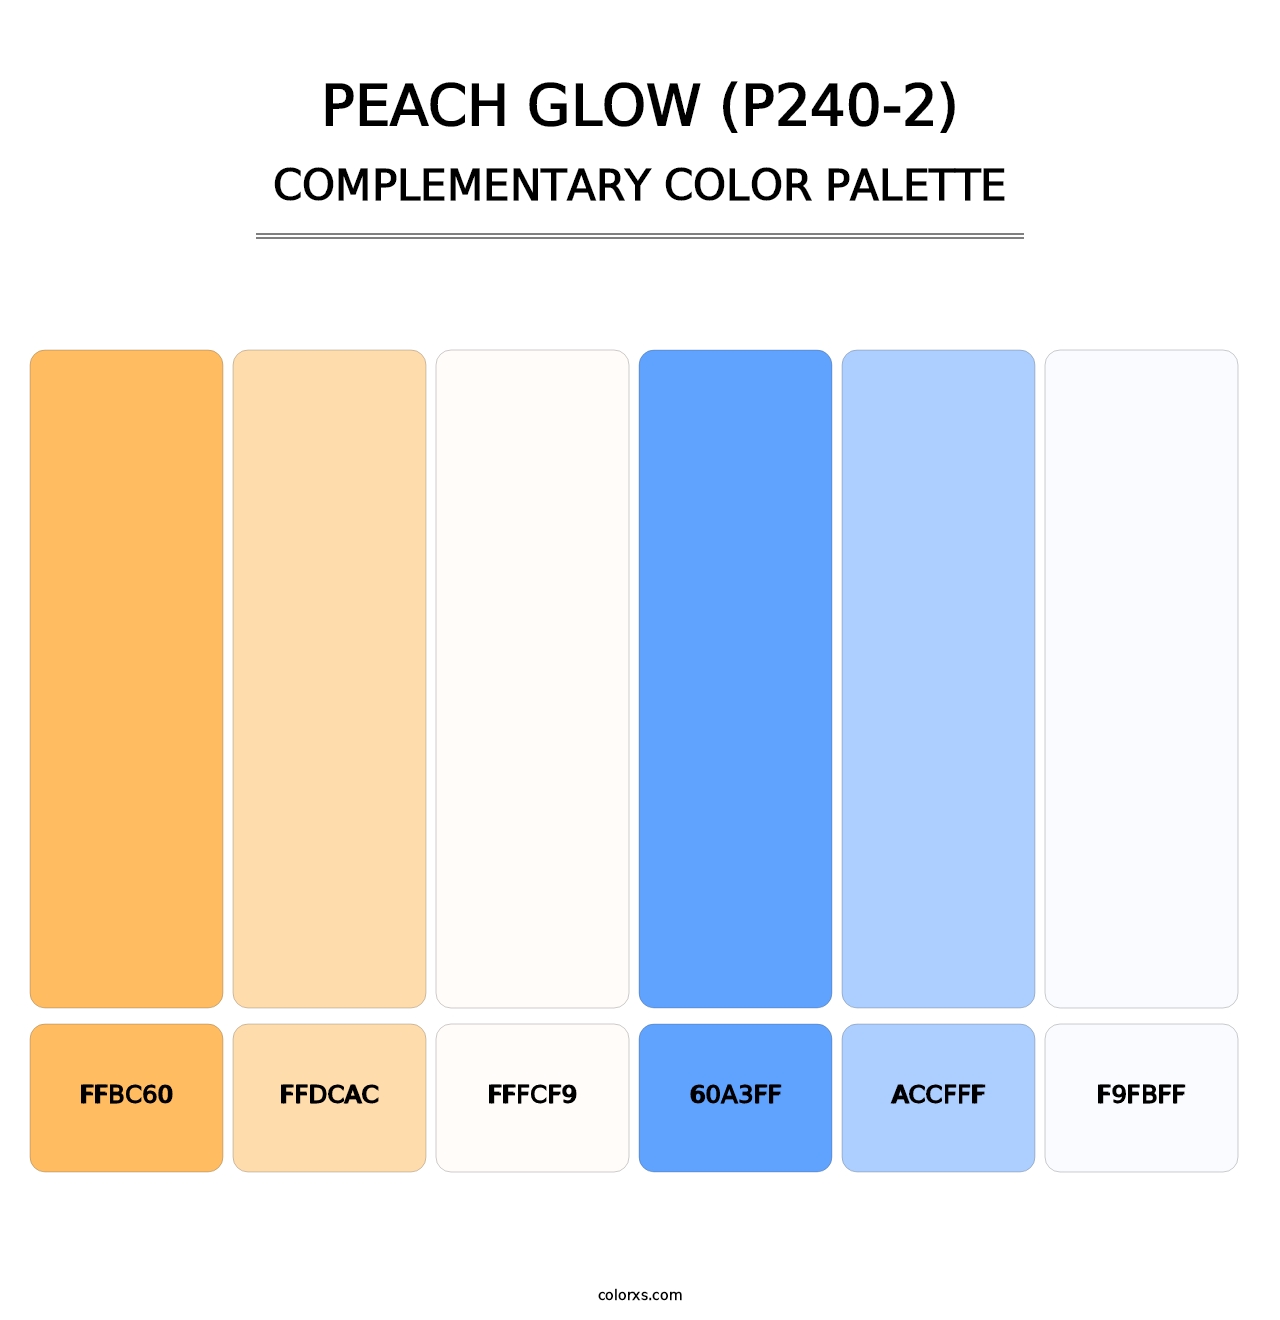 Peach Glow (P240-2) - Complementary Color Palette